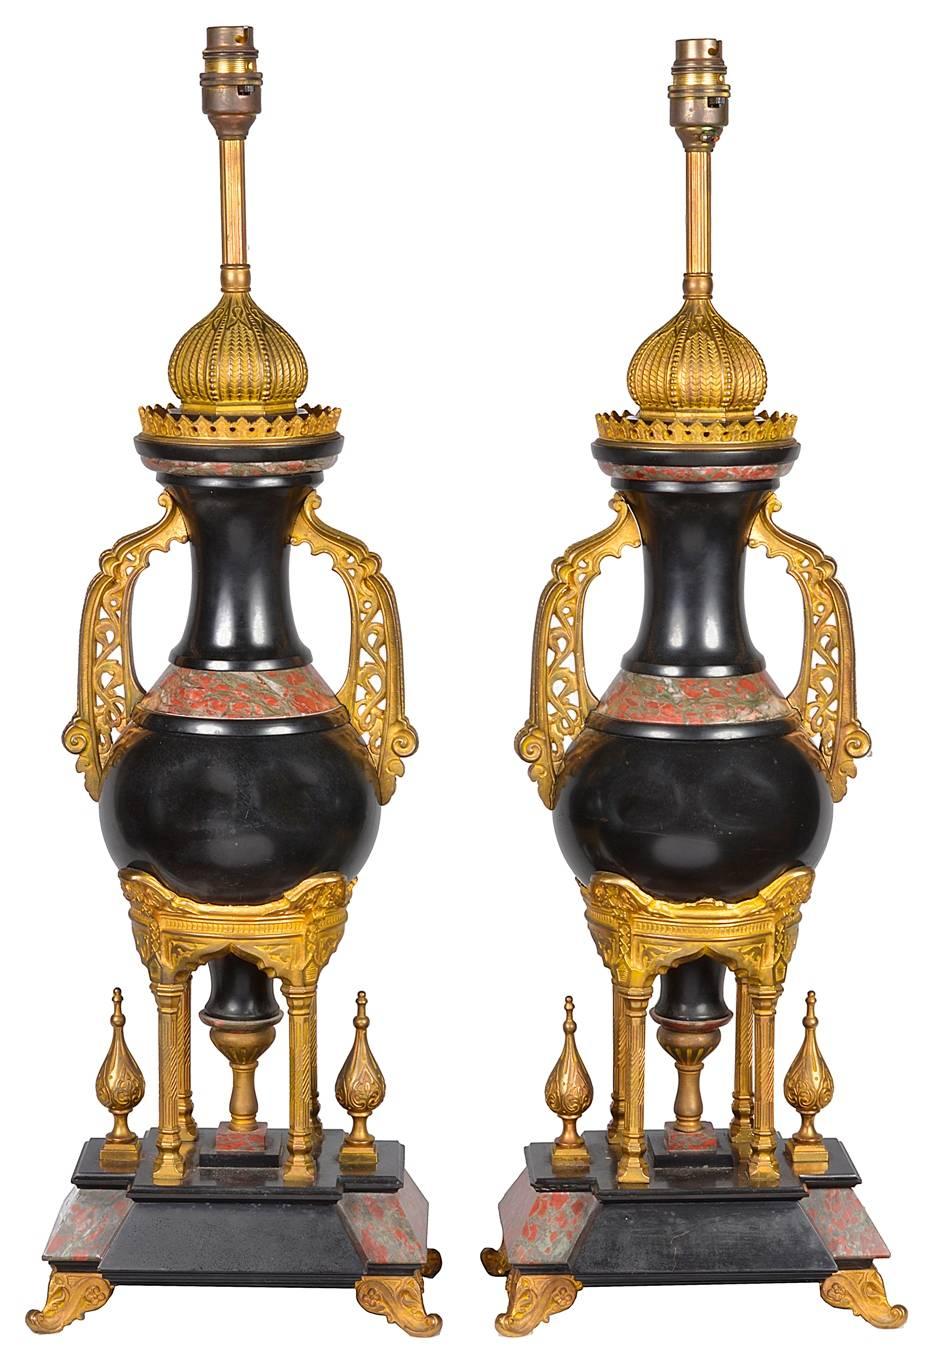 A very good quality pair of 19th century marble and gilded ormolu urns, converted to lamps.